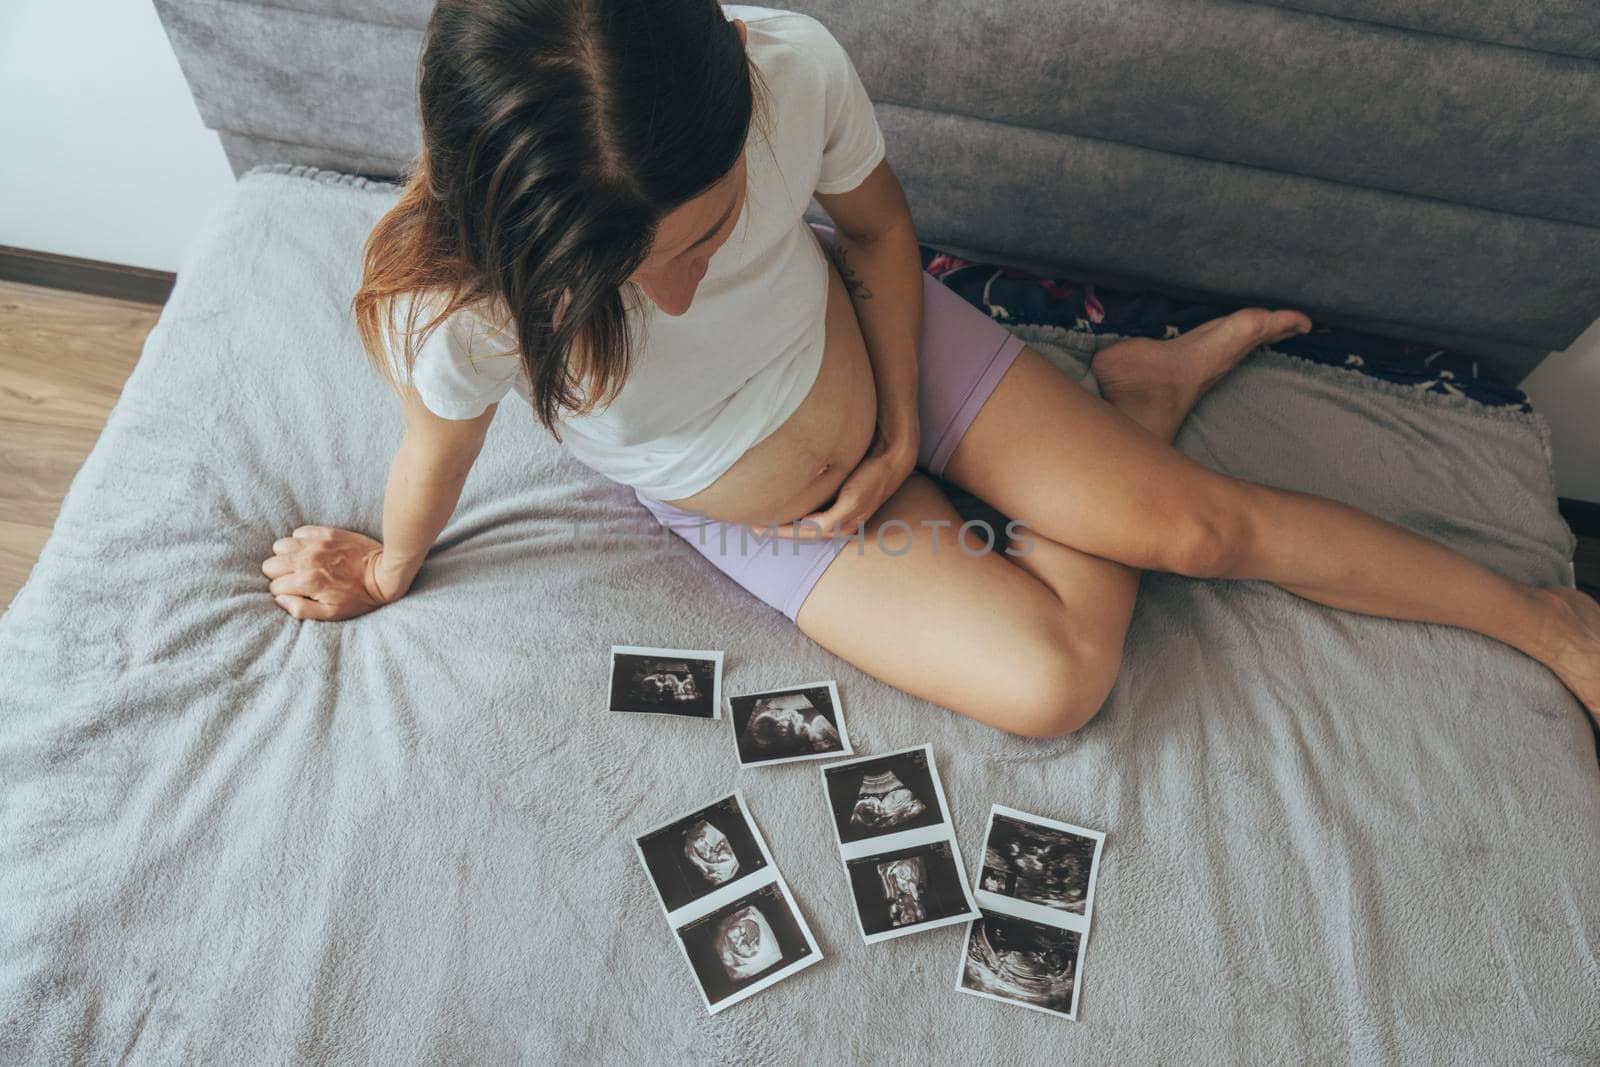 Young pregnant woman, future mother, sitting on comfortable bed and looking at ultrasound x ray photos of her baby in tummy, view from the top.